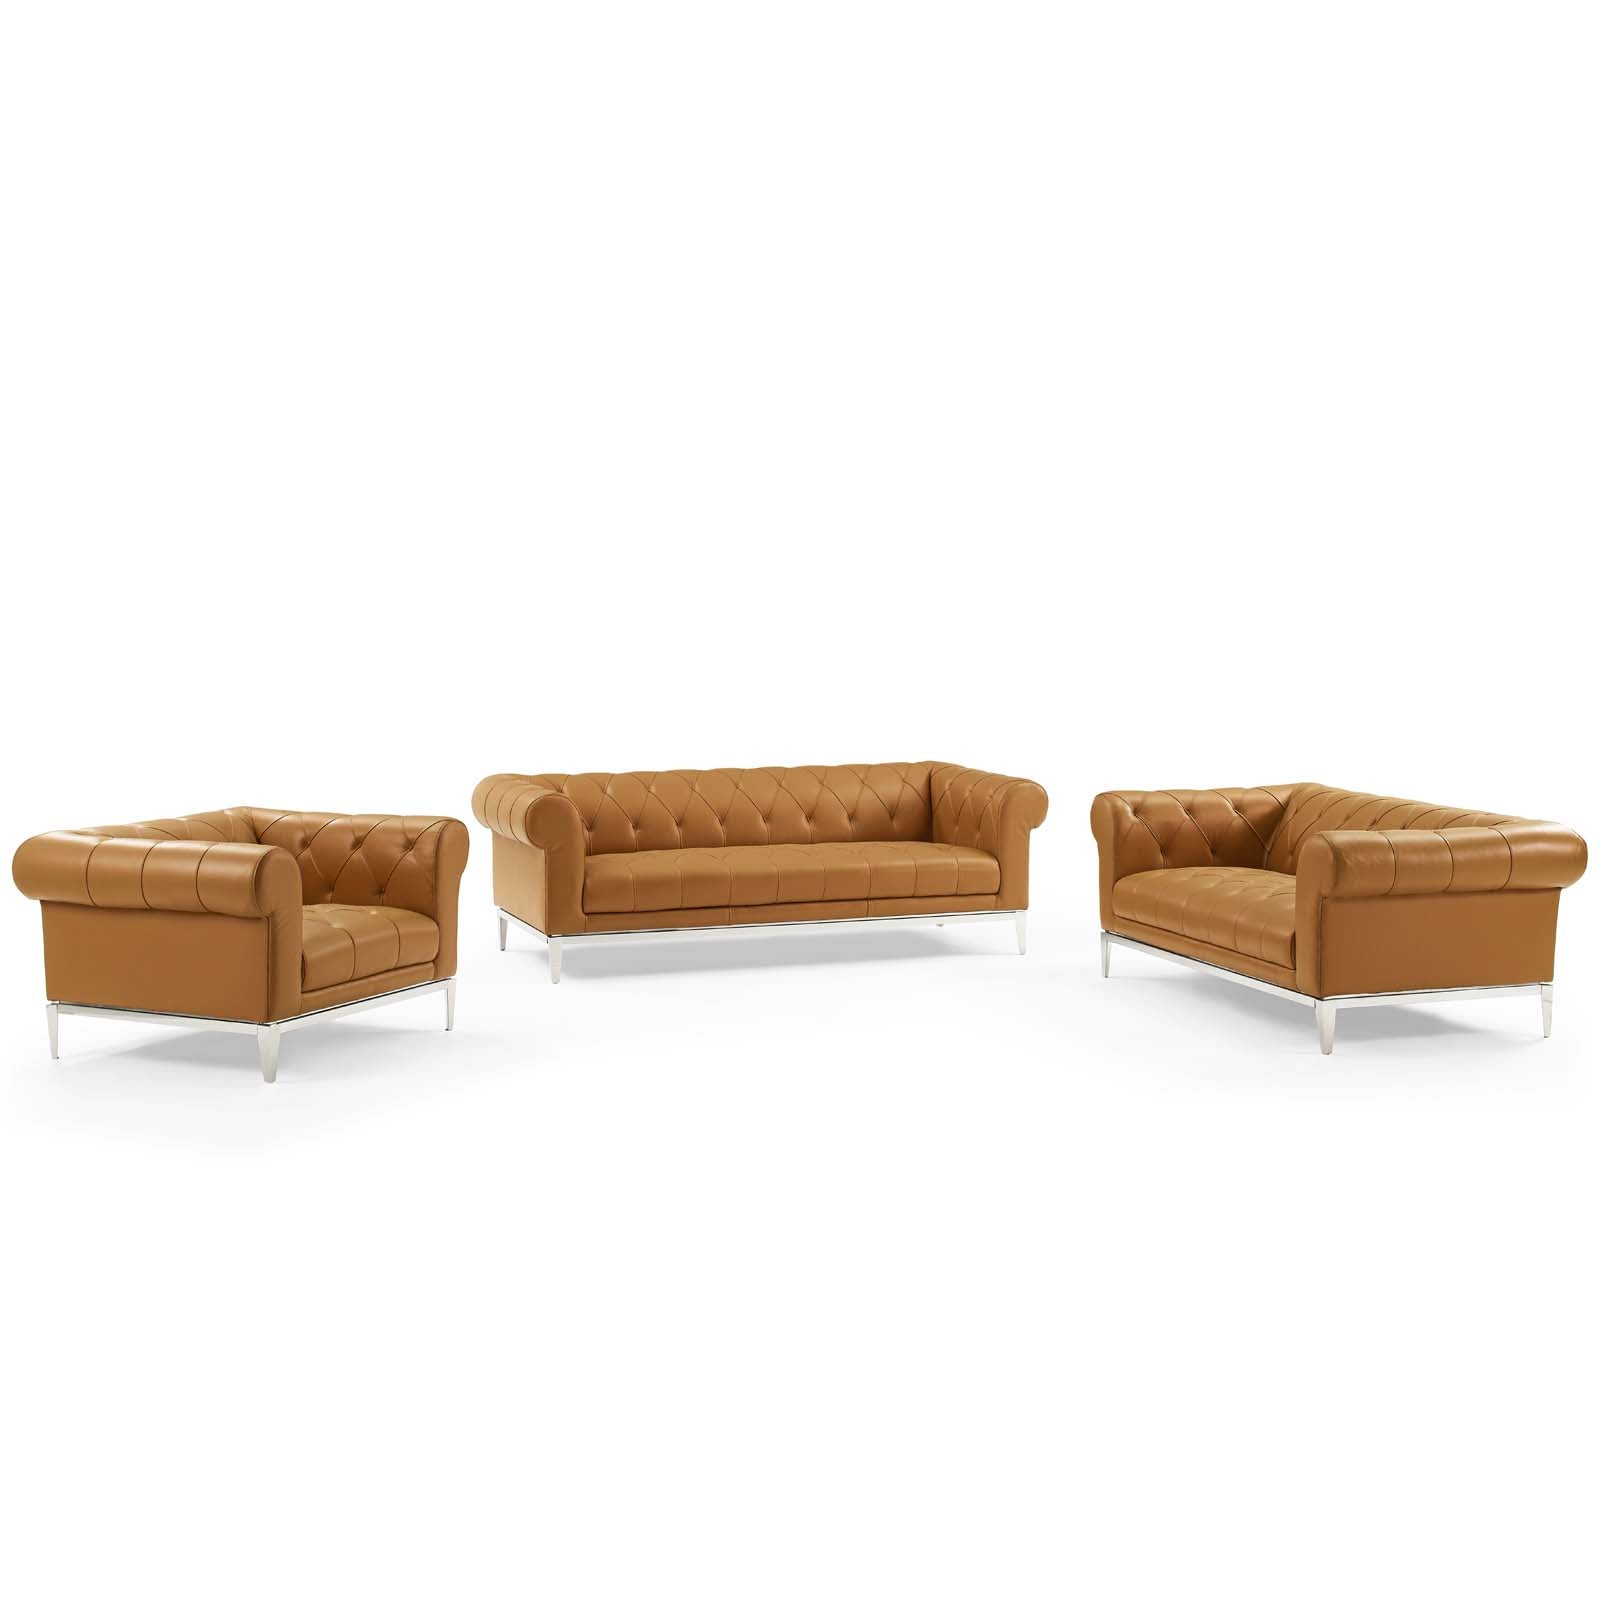 Idyll 3 Piece Upholstered Leather Set - East Shore Modern Home Furnishings